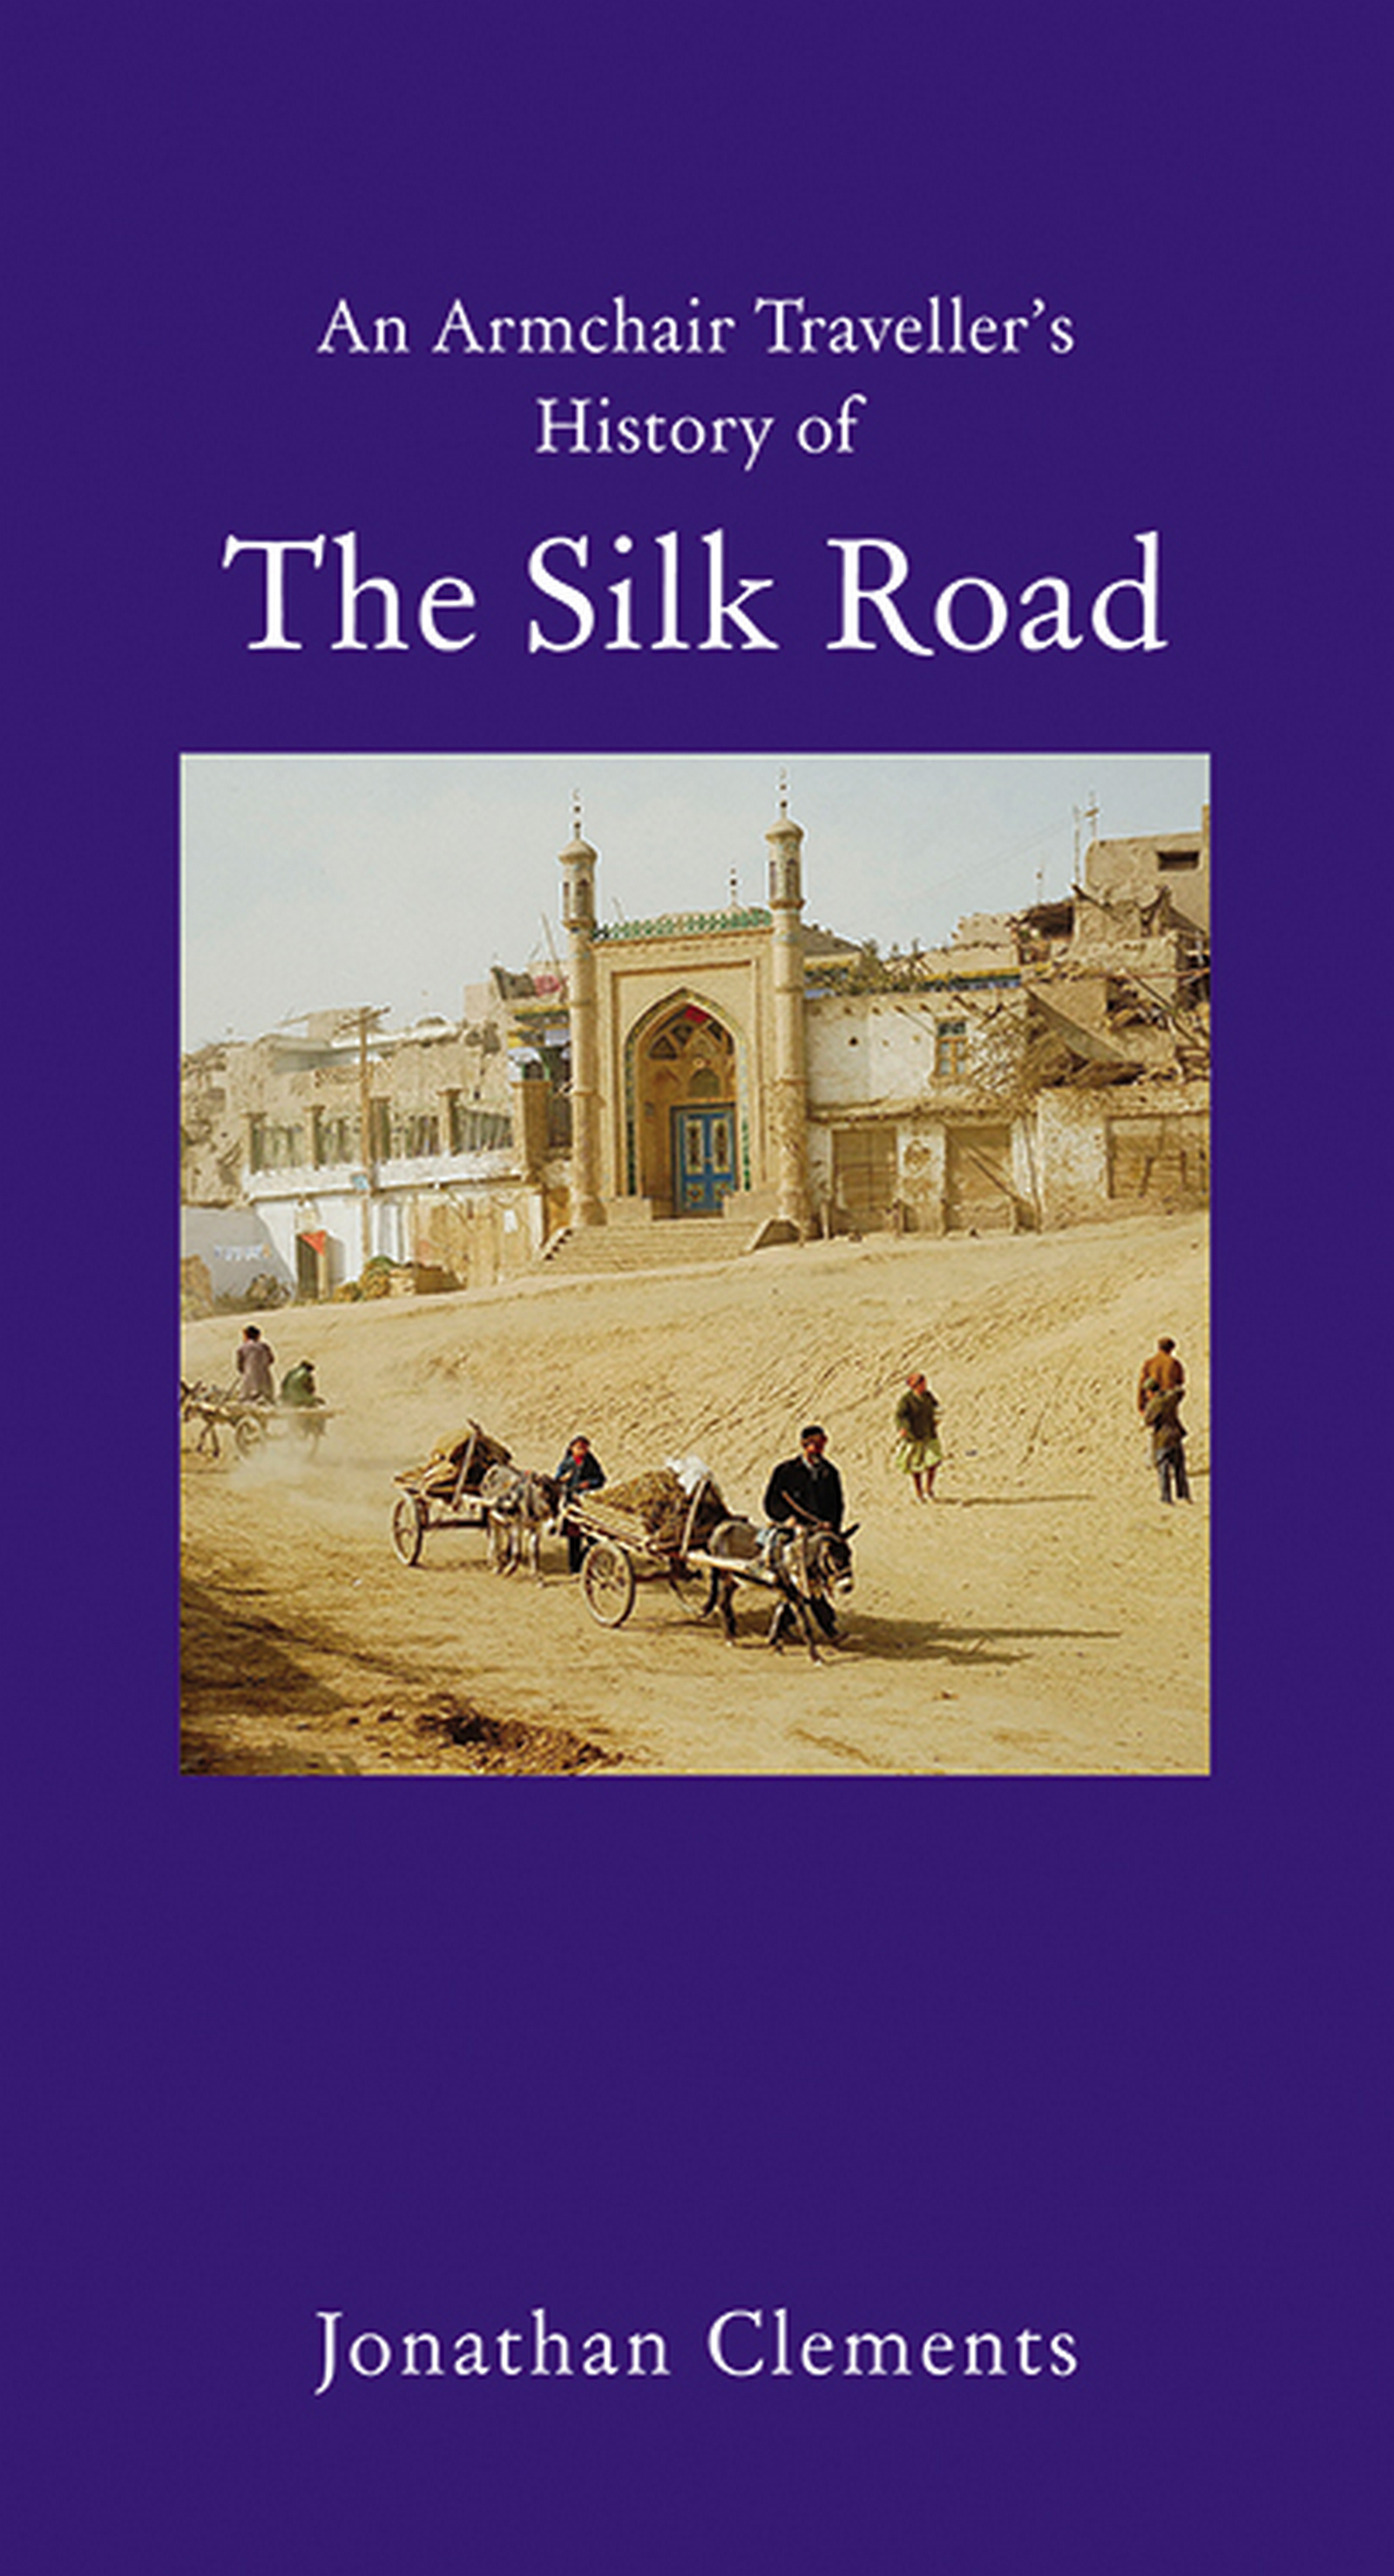 A History of the Silk Road - 15-24.99